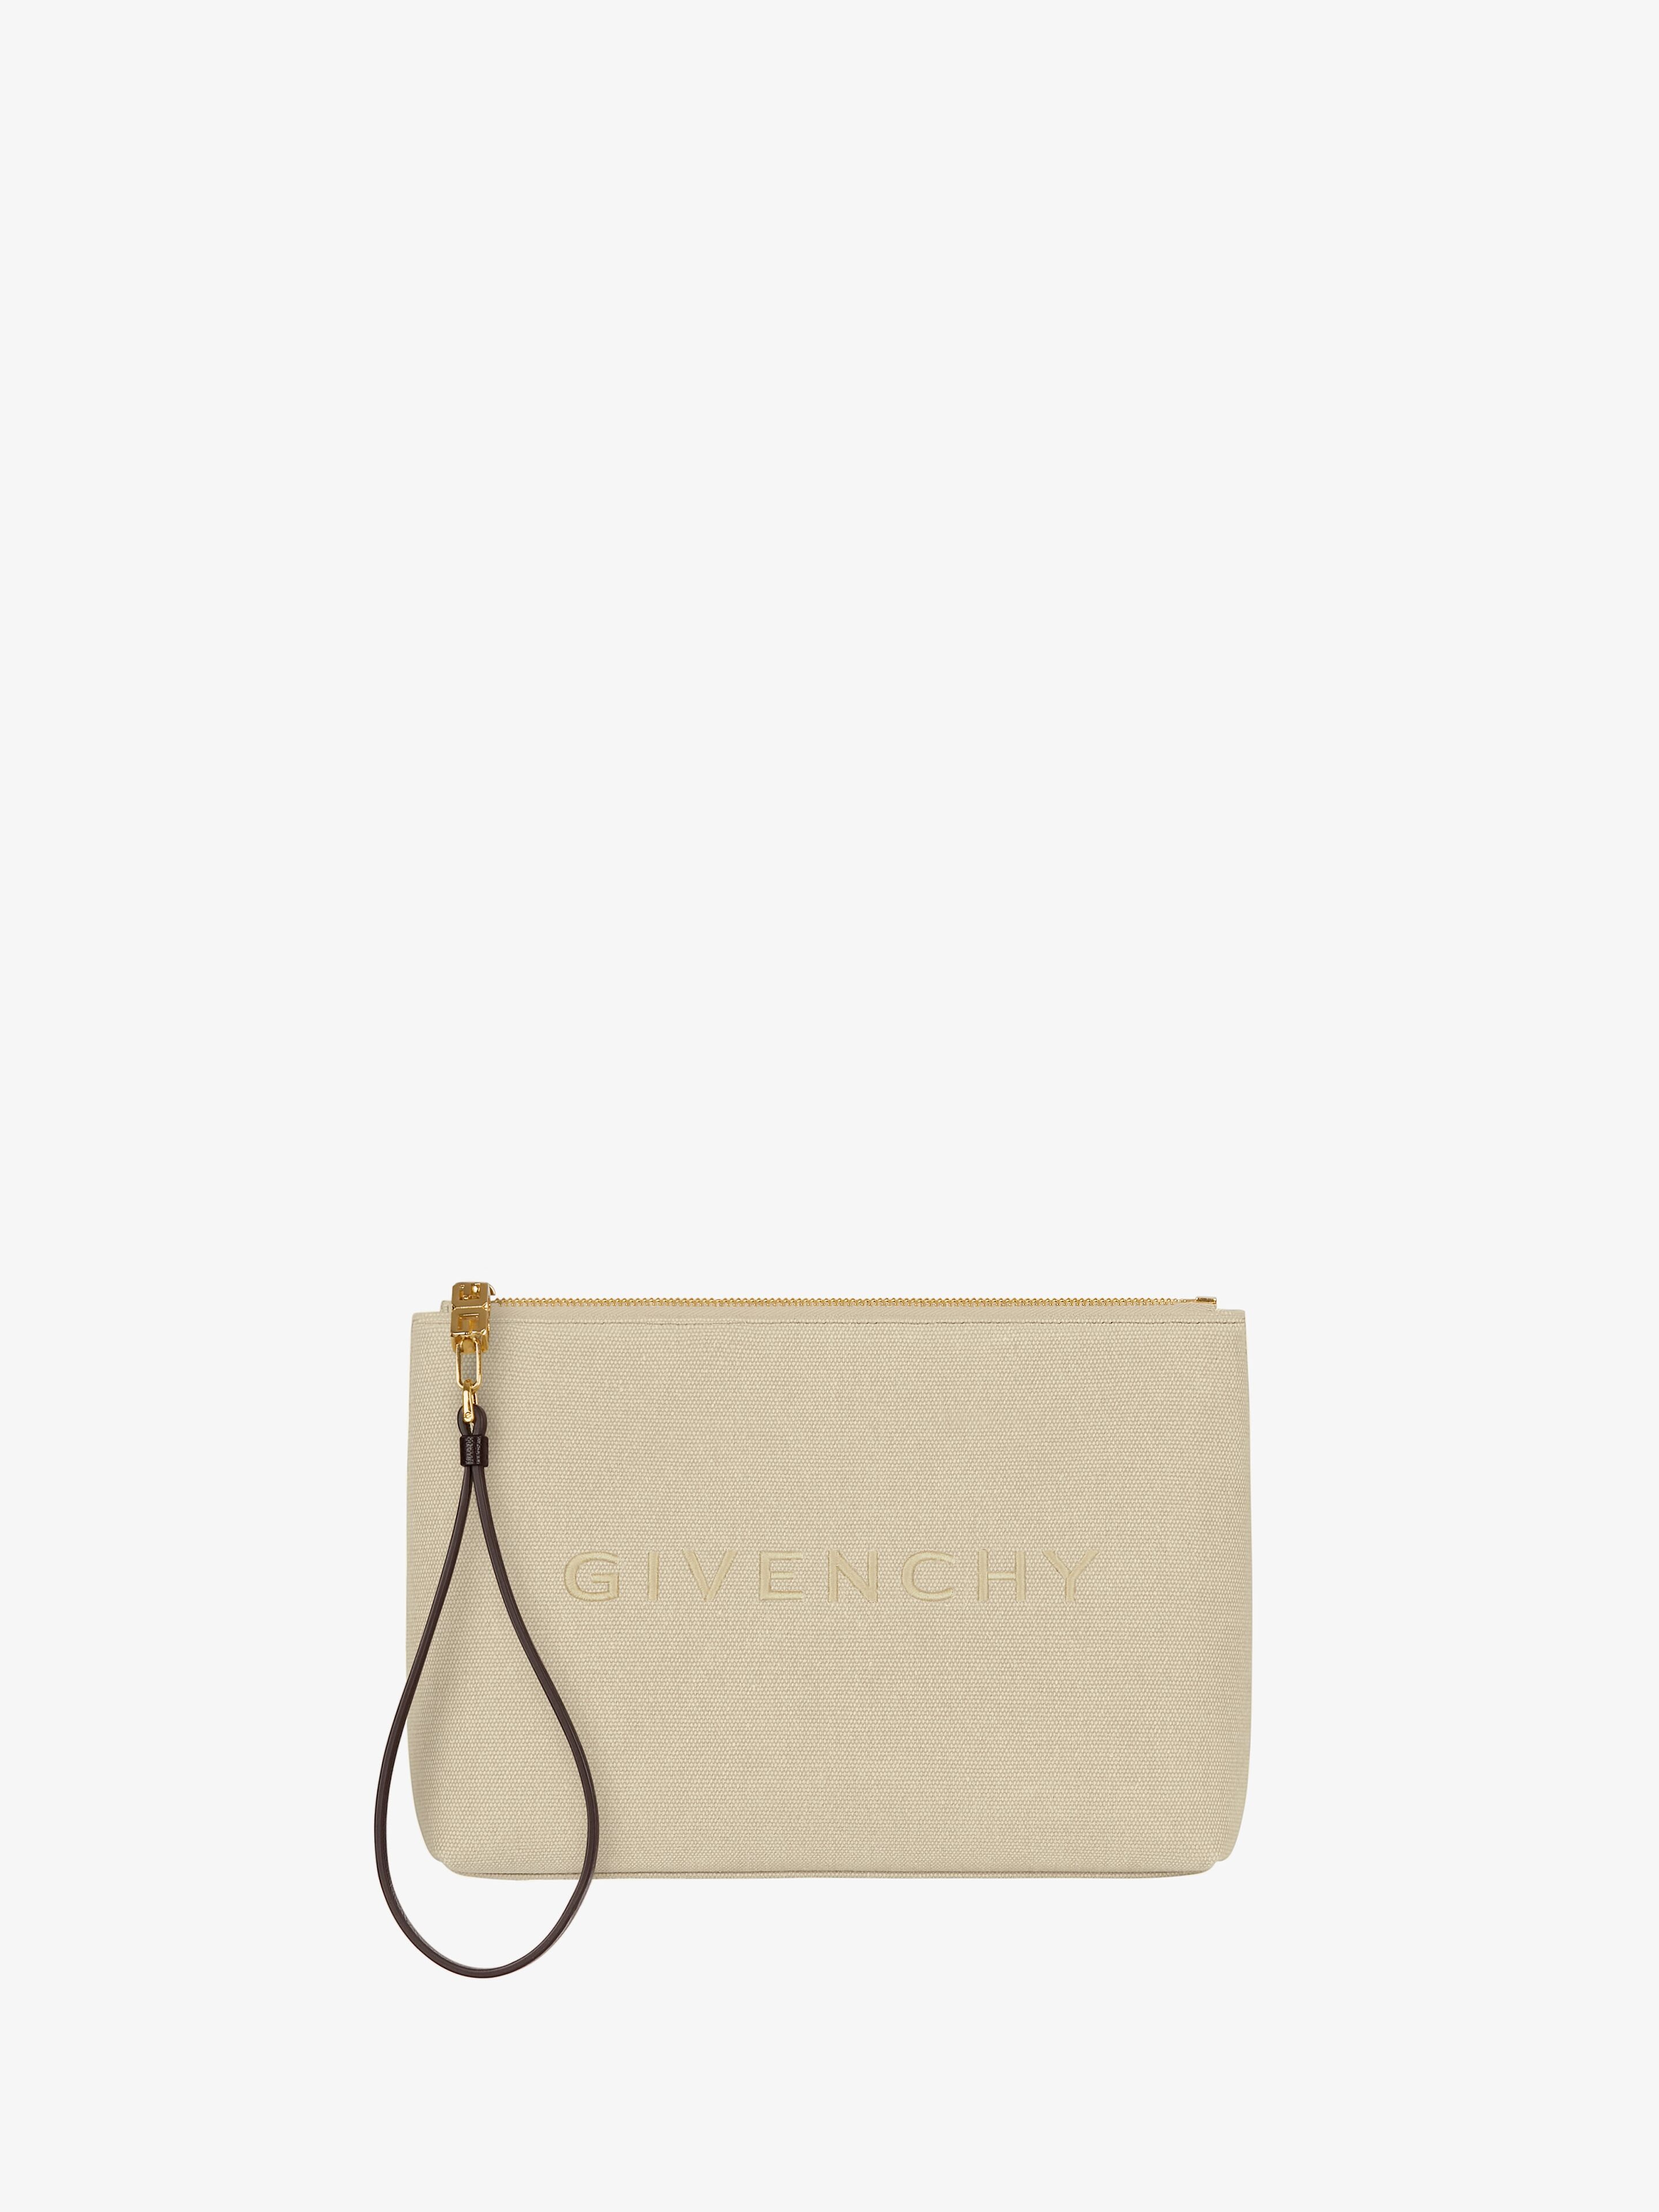 GIVENCHY TRAVEL POUCH IN CANVAS - 1